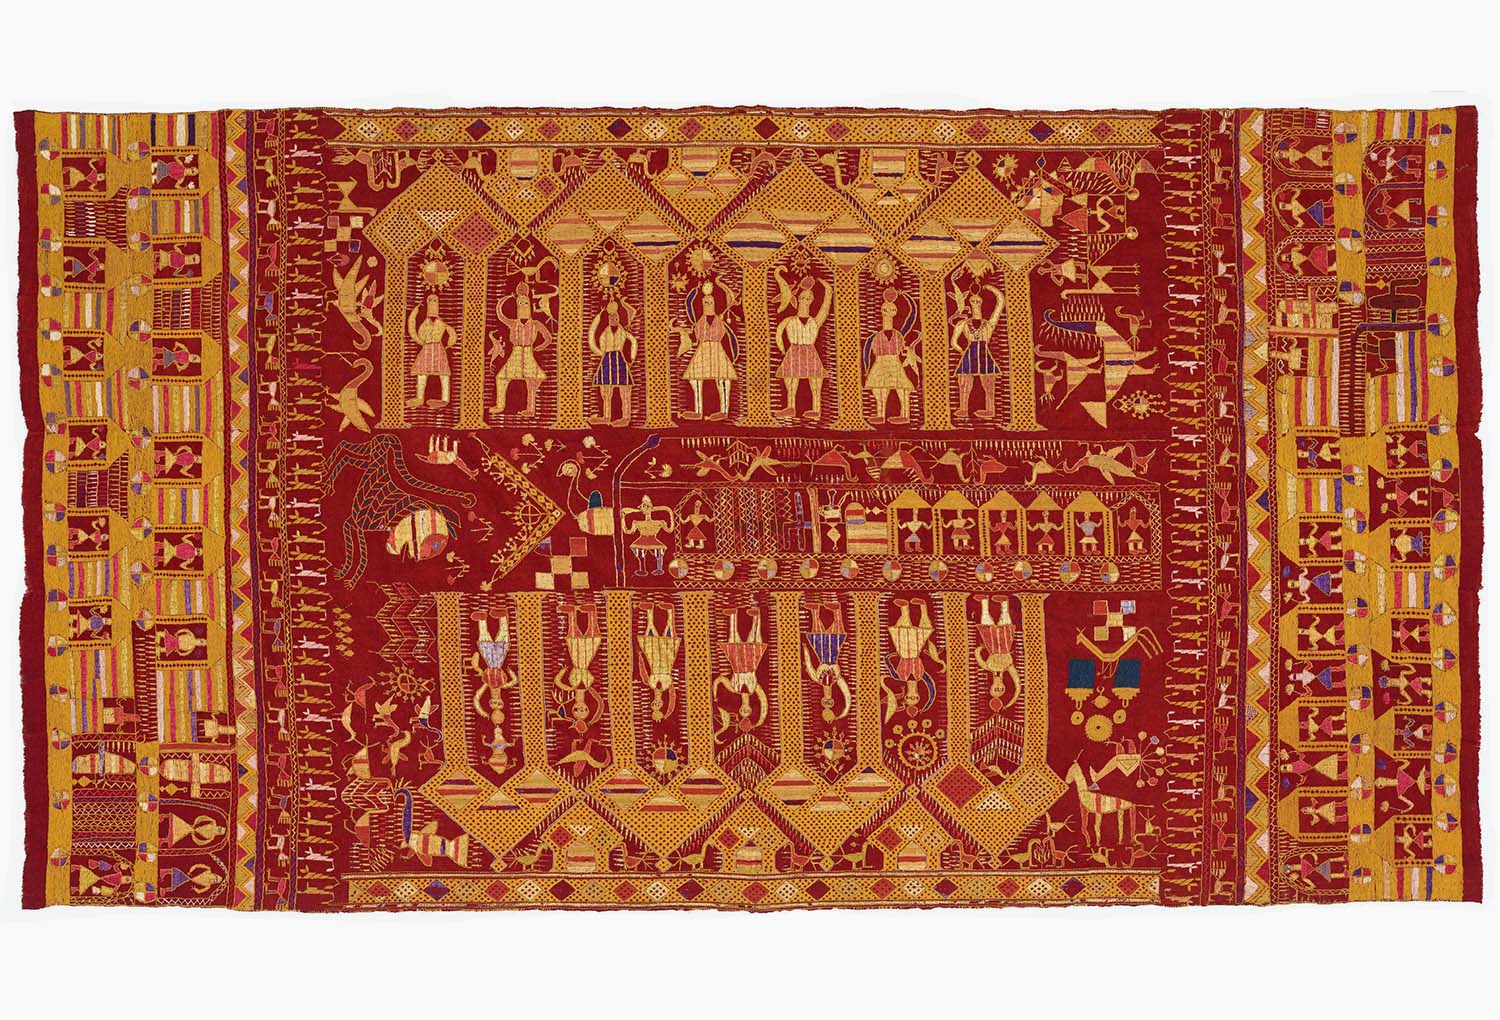 Embroidered textile showing two rows of figures under a colonnade. A tram full of people and animals moves through the centre.